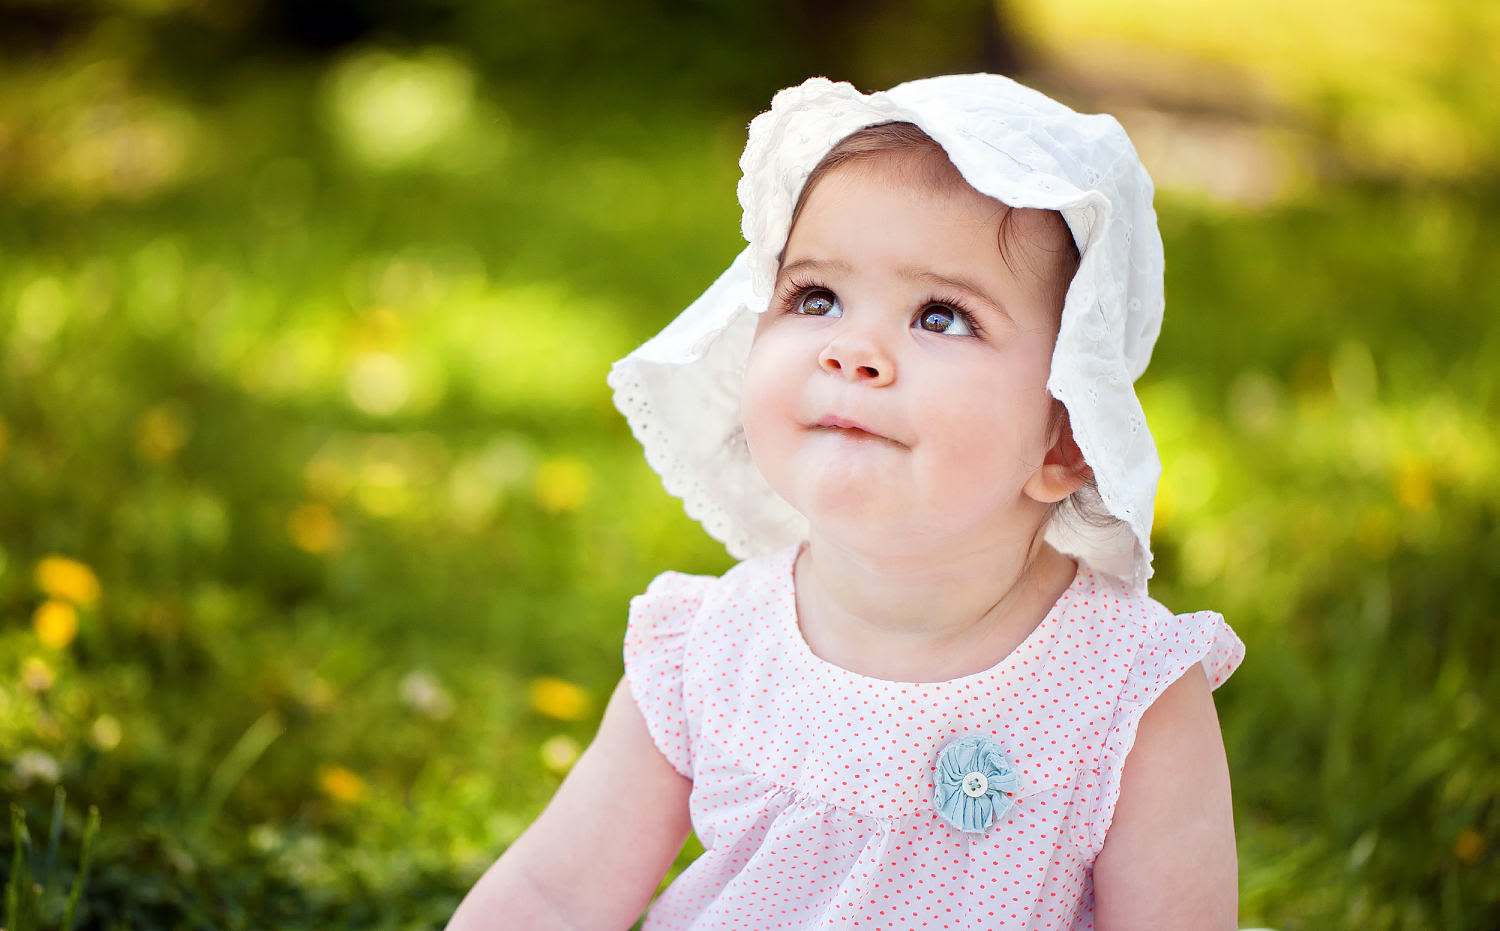 135 saint names for girls that will perfectly fit your little angel